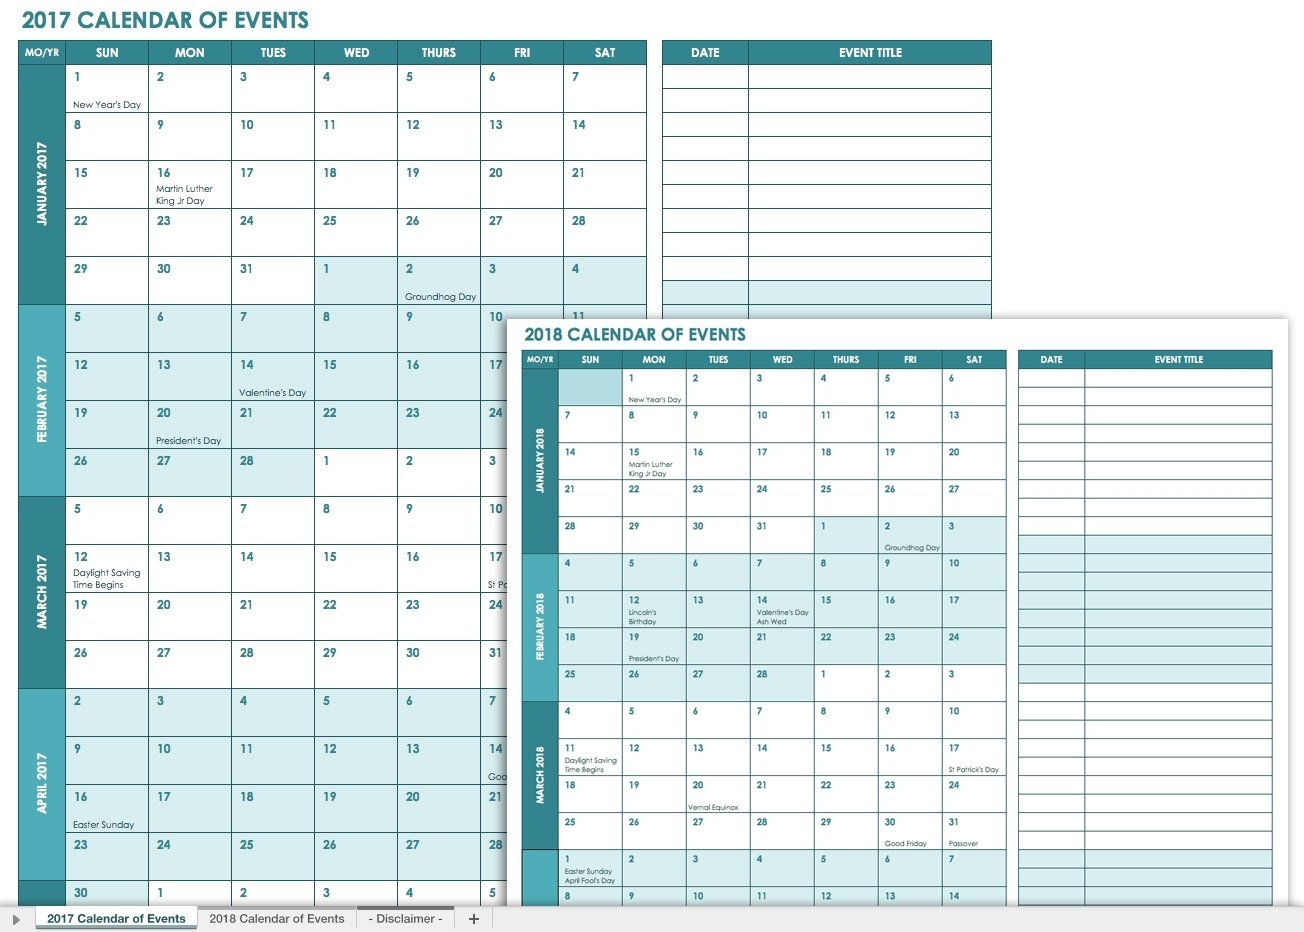 21 Free Event Planning Templates | Smartsheet within Calendar Of Events Template Free